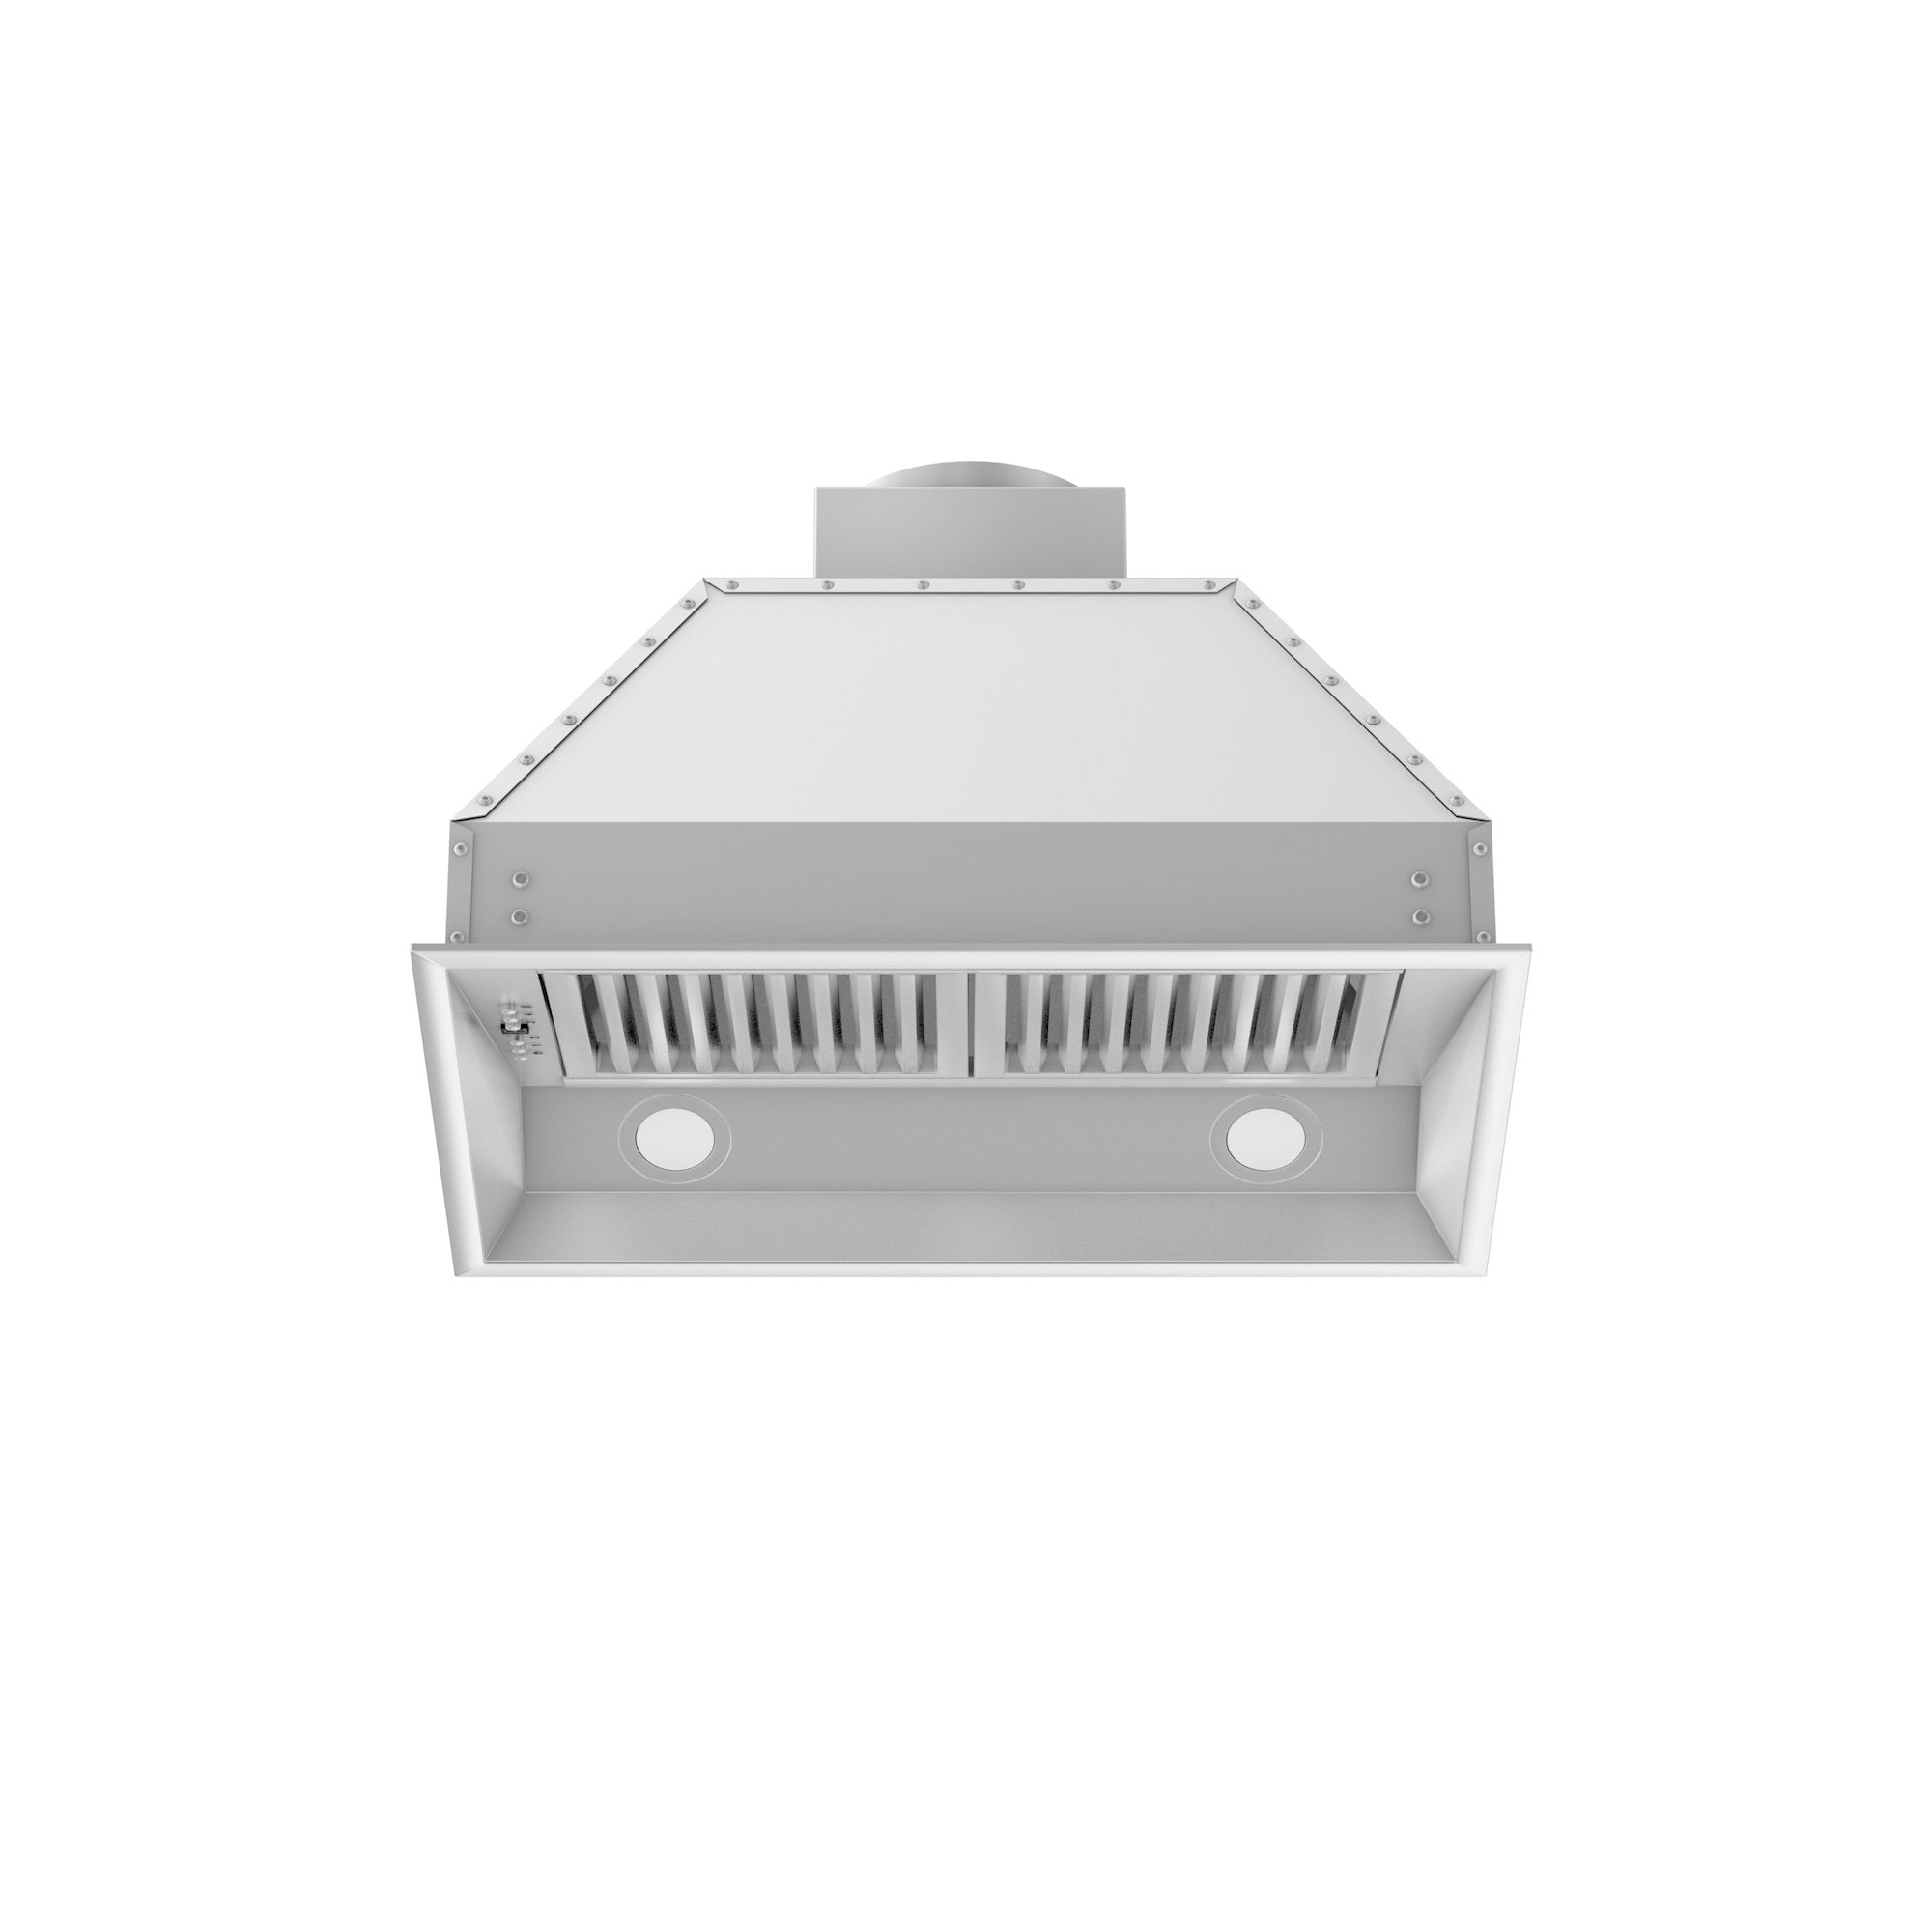 ZLINE 28" Ducted Remote Blower Range Hood Insert in Stainless Steel (698-RS-28-400)